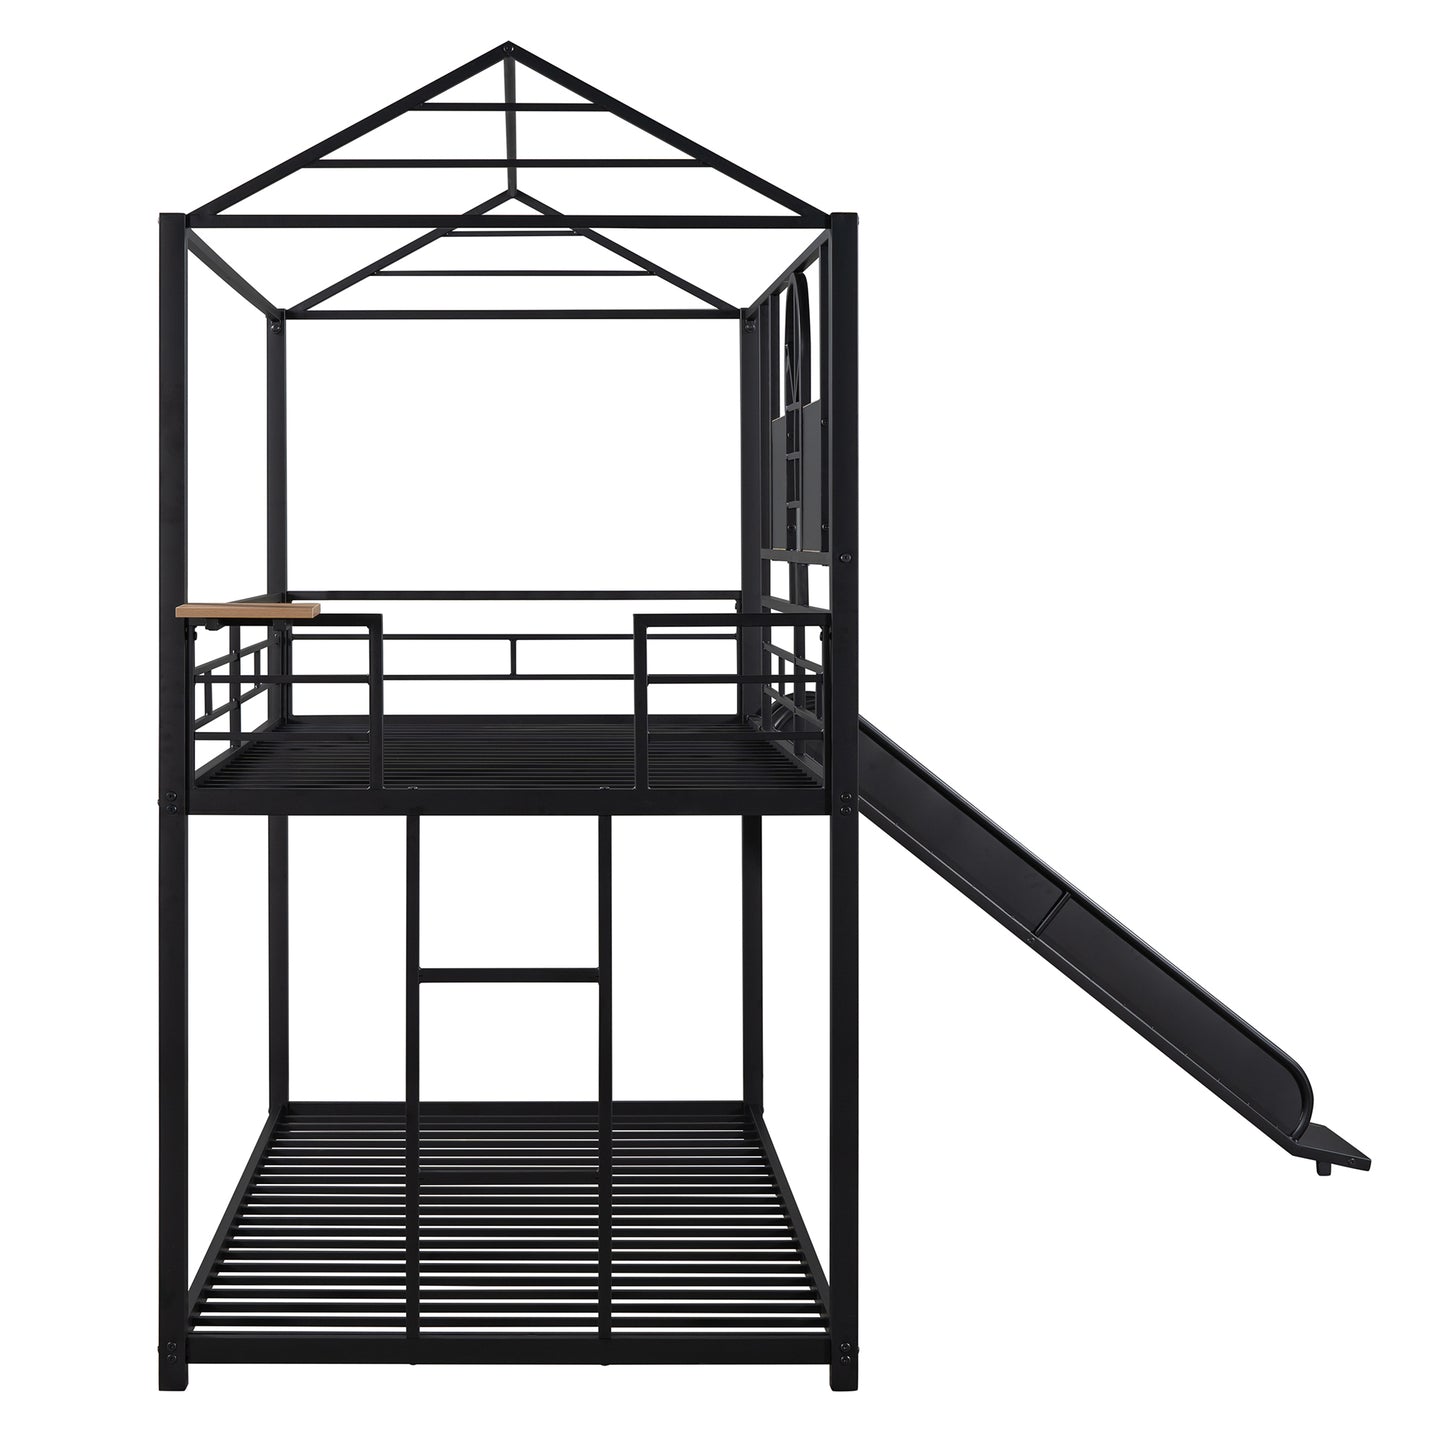 Twin Over Twin Metal Housebed Bunk Bed